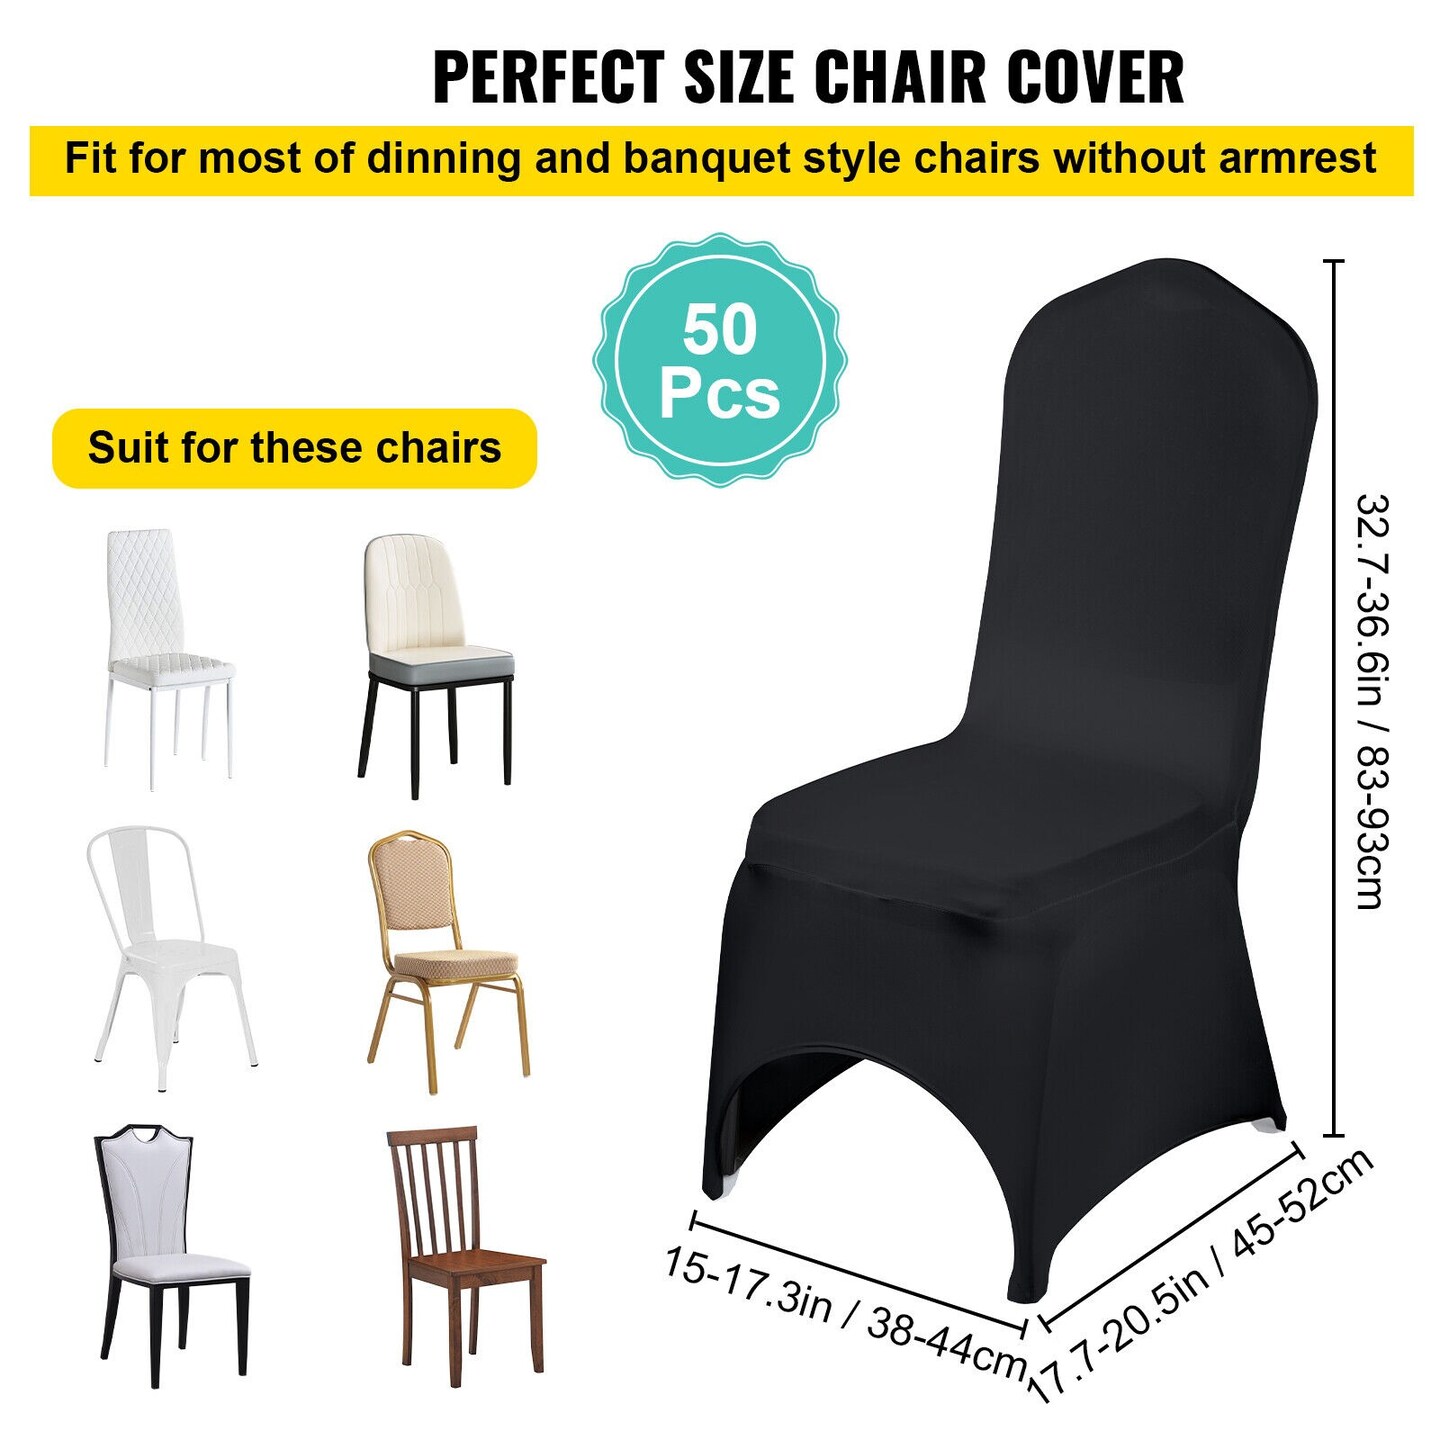 50Pcs Black Stretch Spandex Folding Chair Covers for Formal